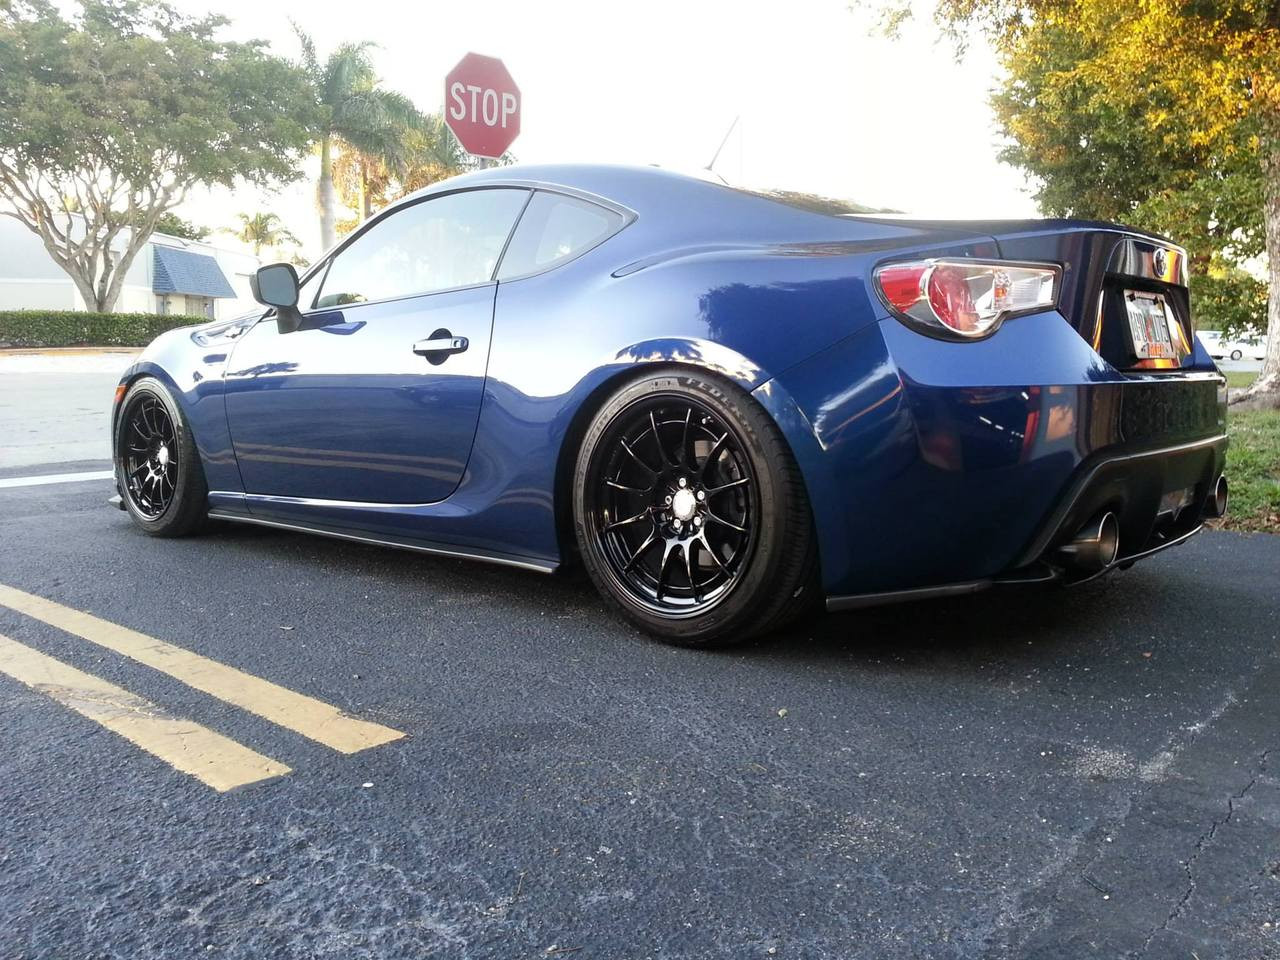 Example of fitment from FT86Club